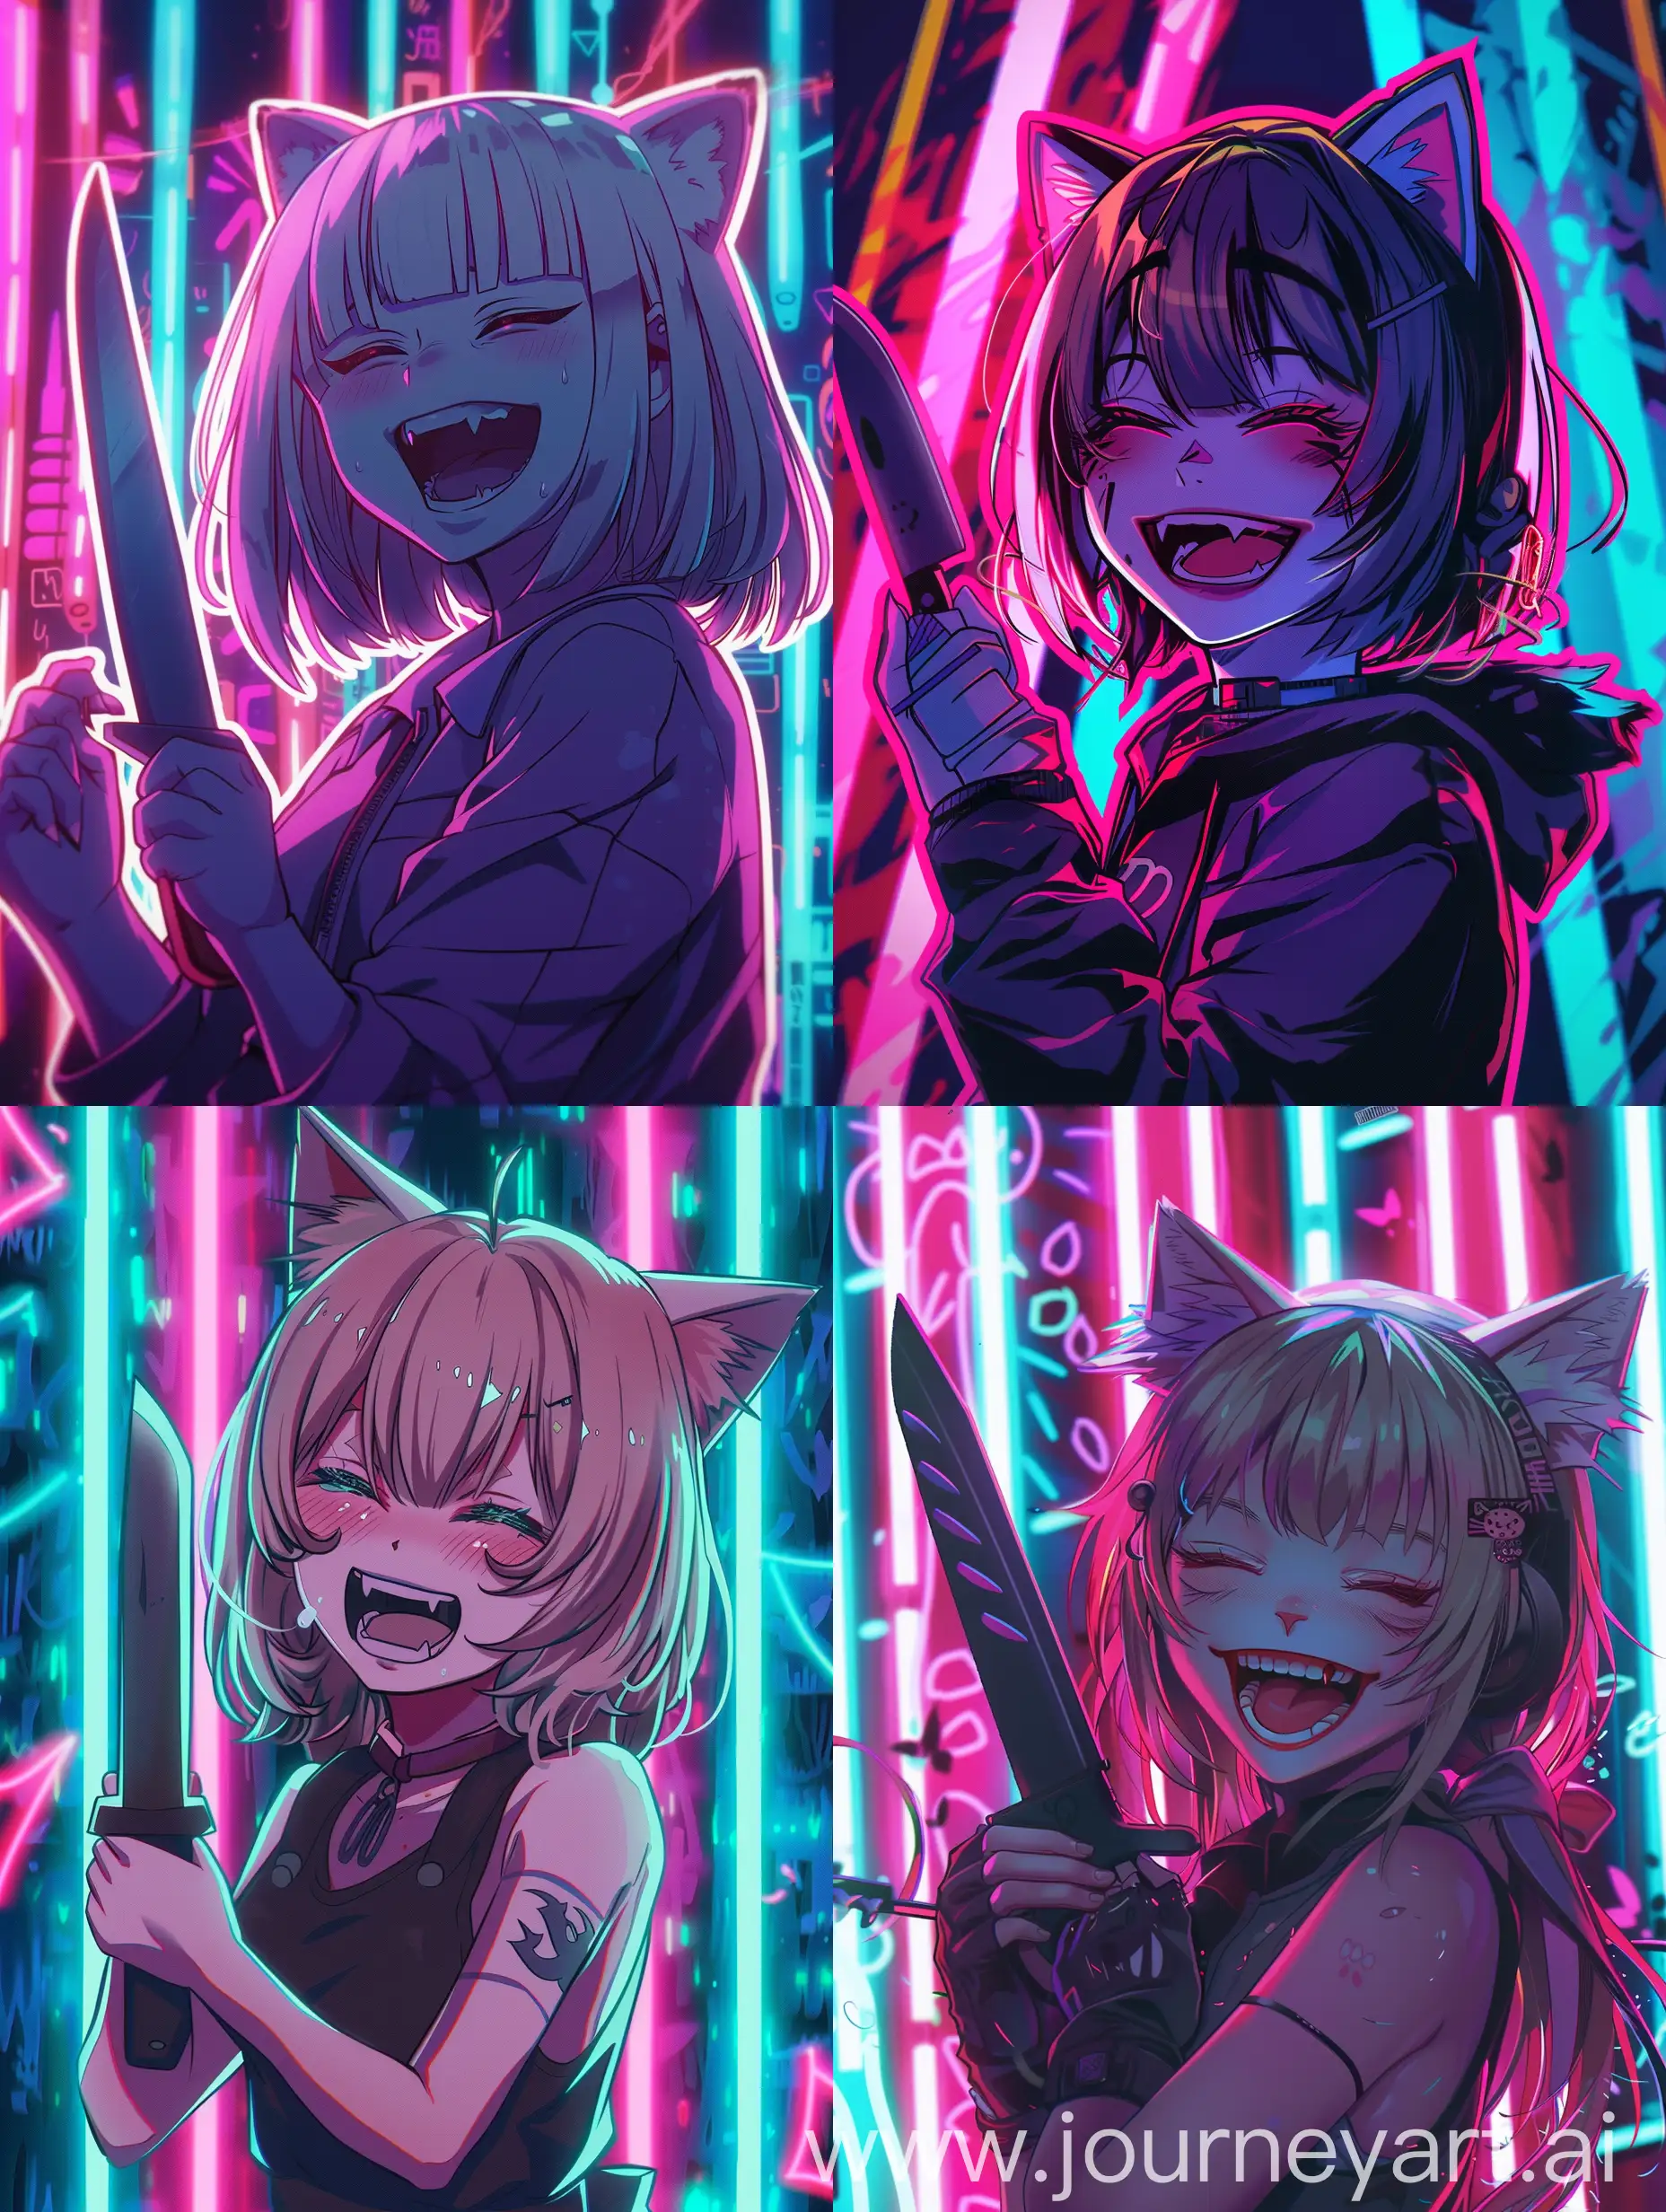 anime girl with cat ears laughing, she holding a knife, with neon background